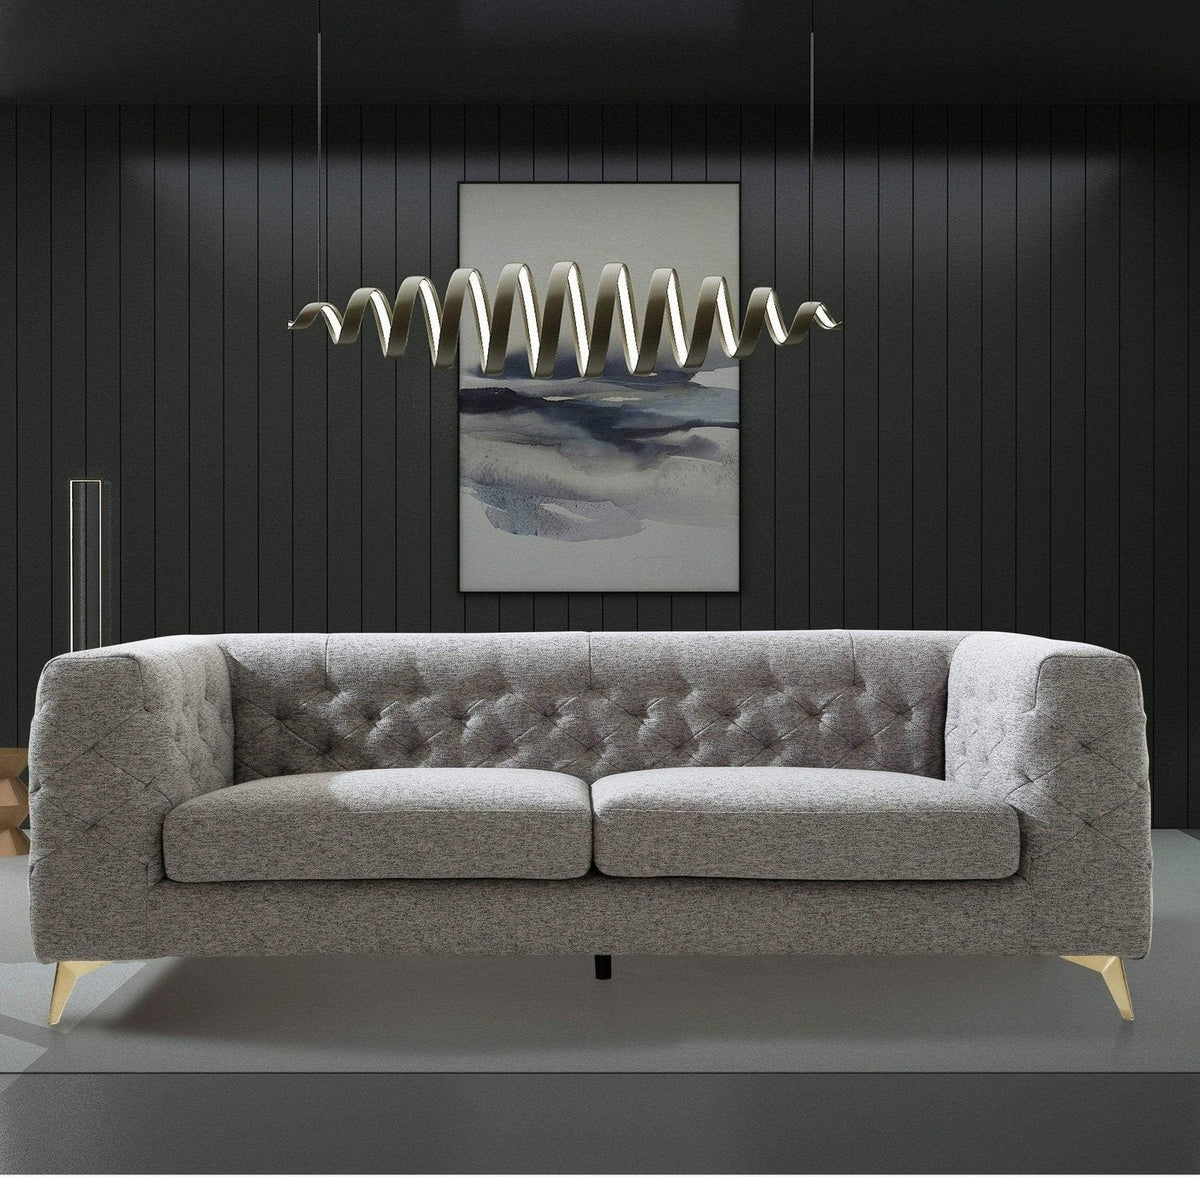 Iconic Home Soho Sofa Linen Textured Upholstery Tufted Shelter Arm Gold Tone Metal Legs Dark Grey